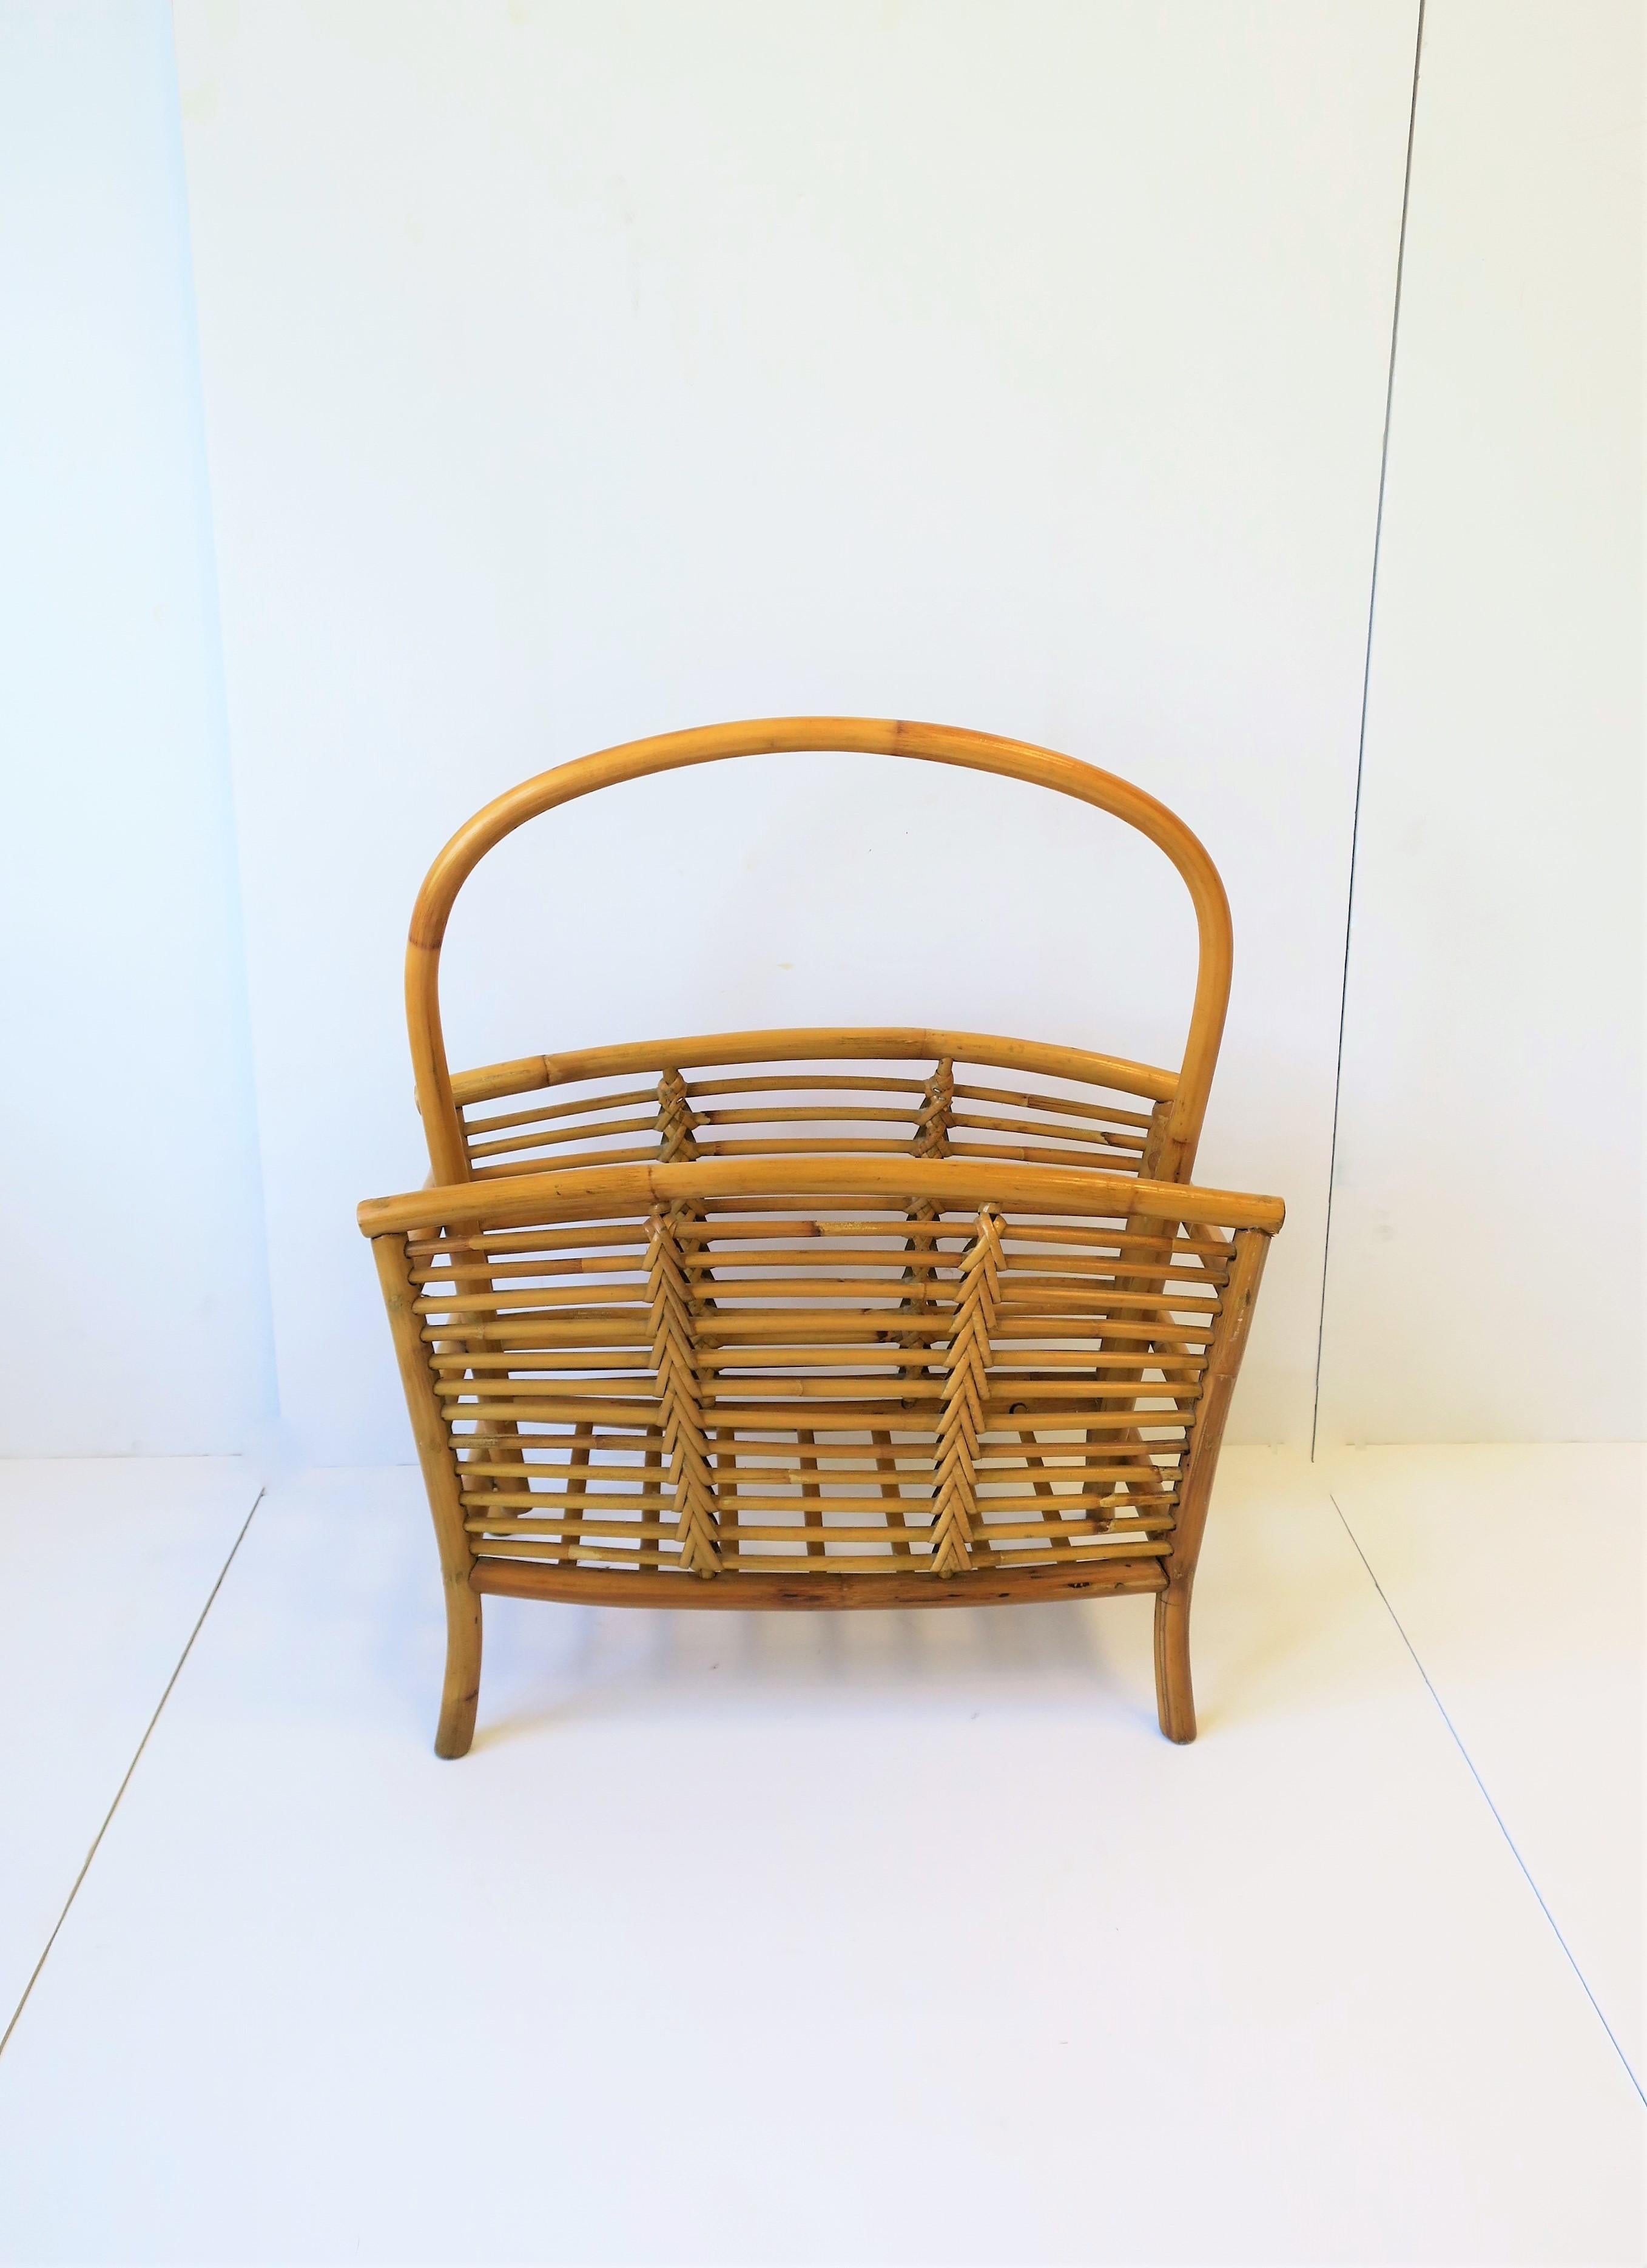 A rattan wicker magazine holder stand, circa mid-20th century. Piece has two storage compartment areas to hold magazines, newspapers, papers, books, etc. A great addition to an office, library, den, pool house, etc. Very good condition as shown in